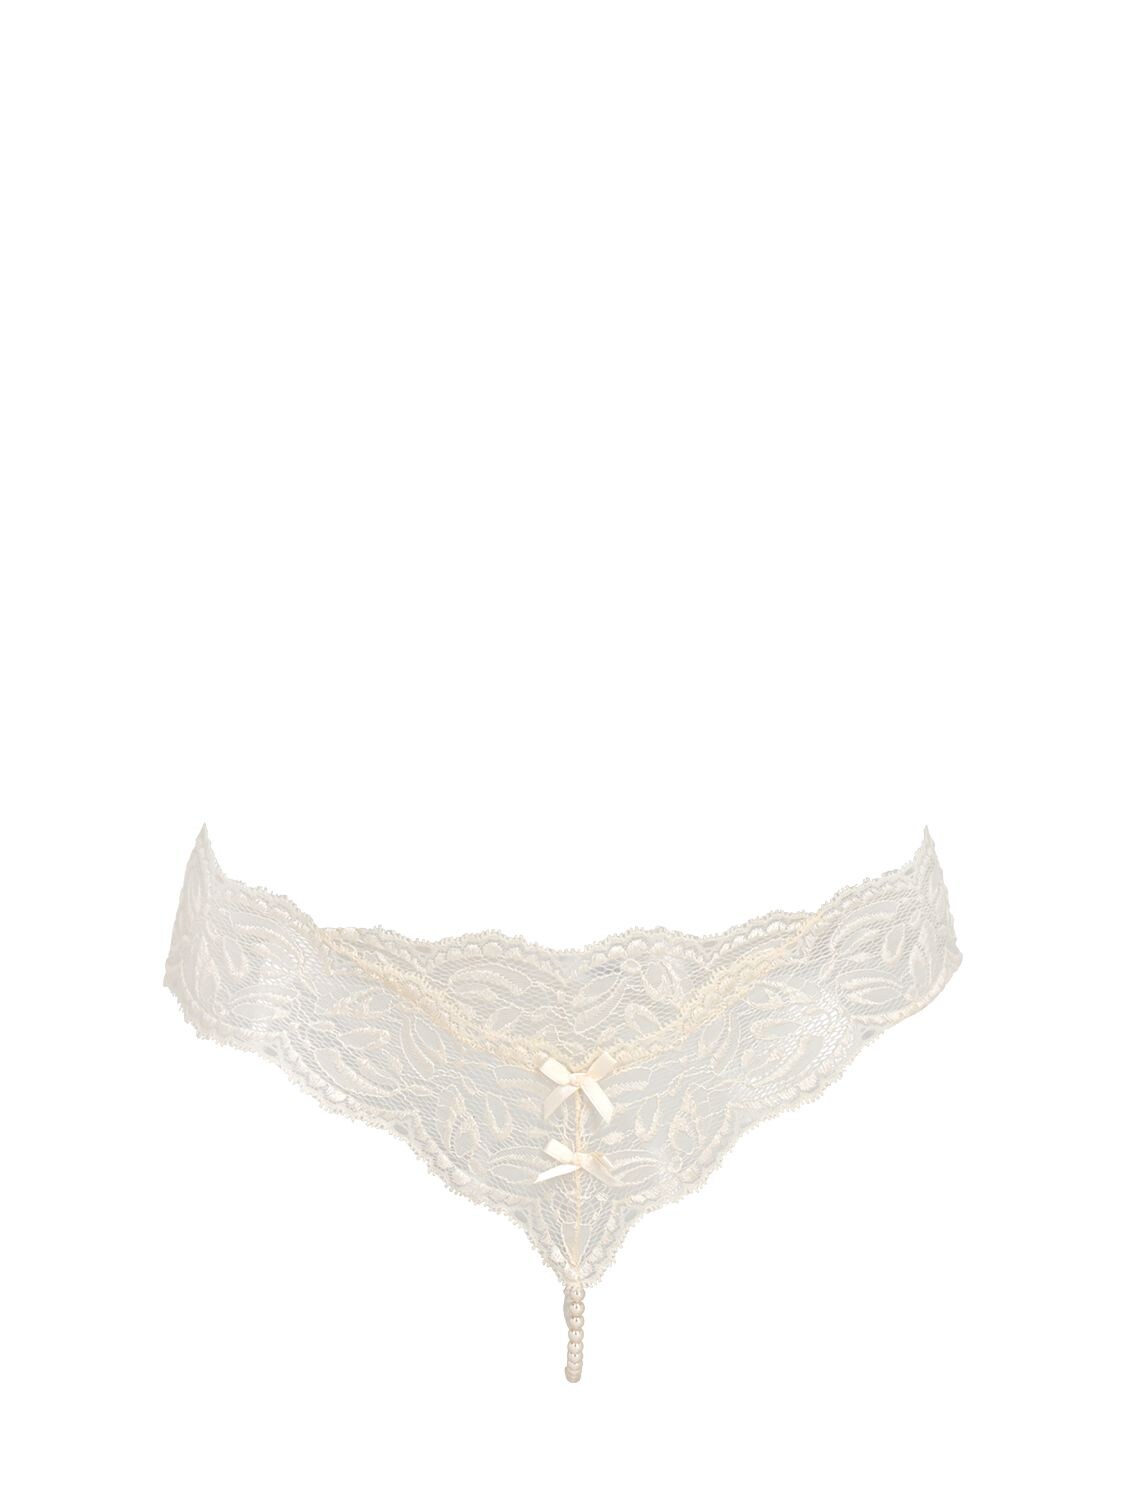 Bracli Embellished Classic Lace Thong In Ivory